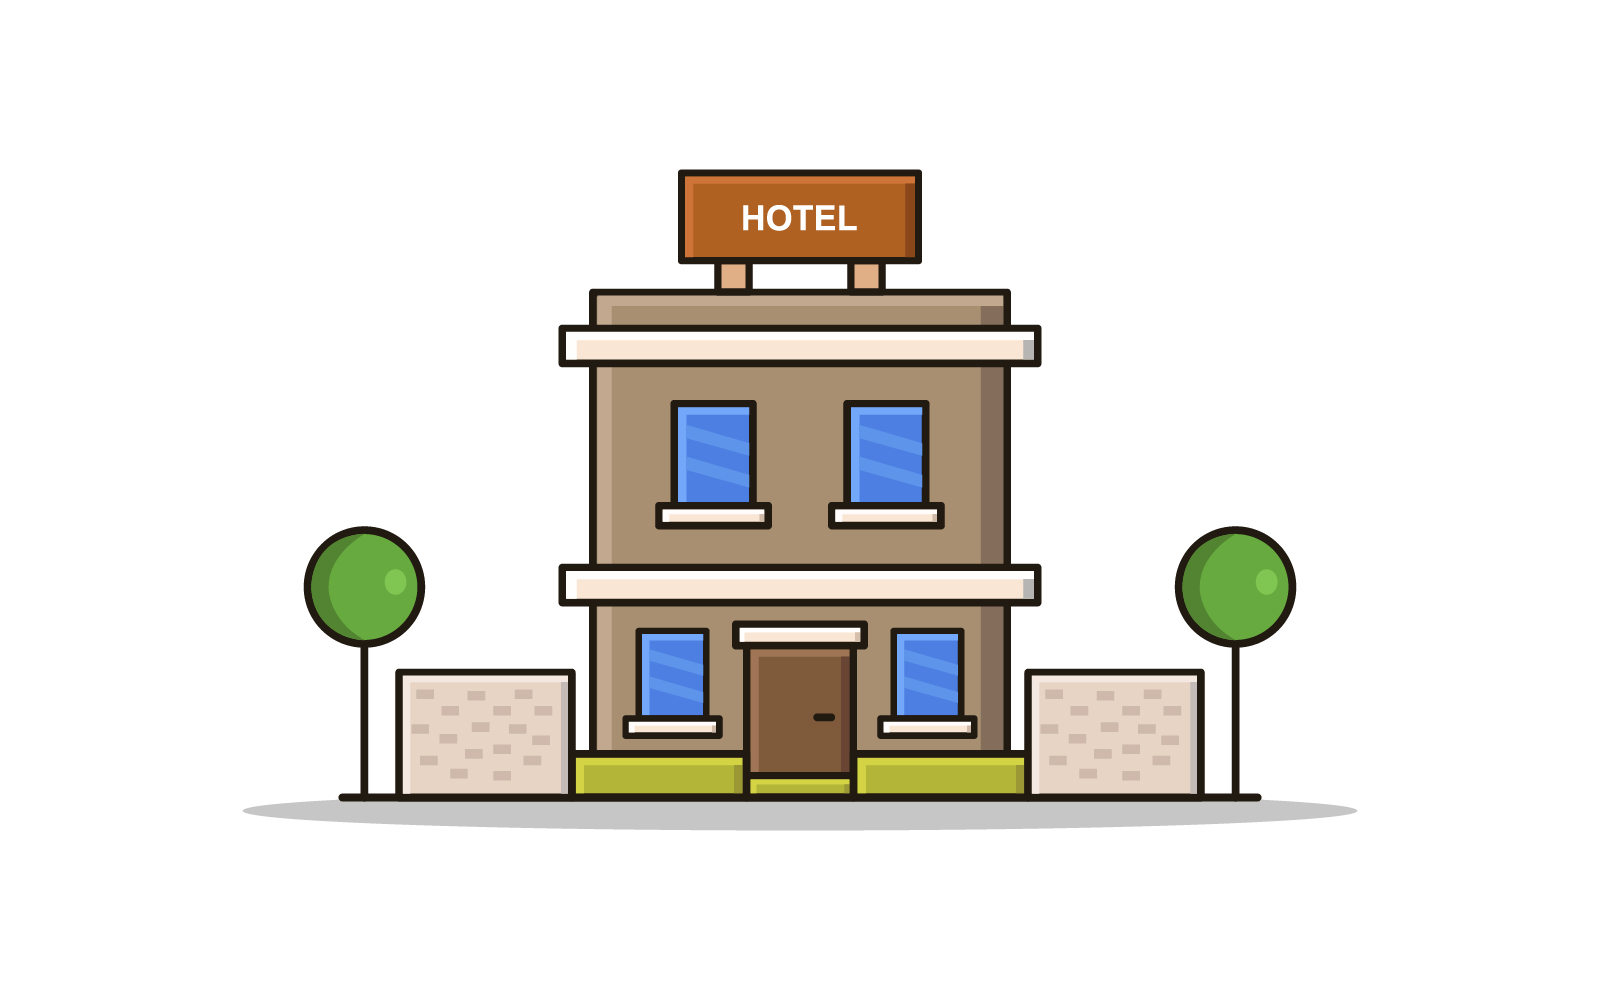 Hotel illustrated in vector on a white background